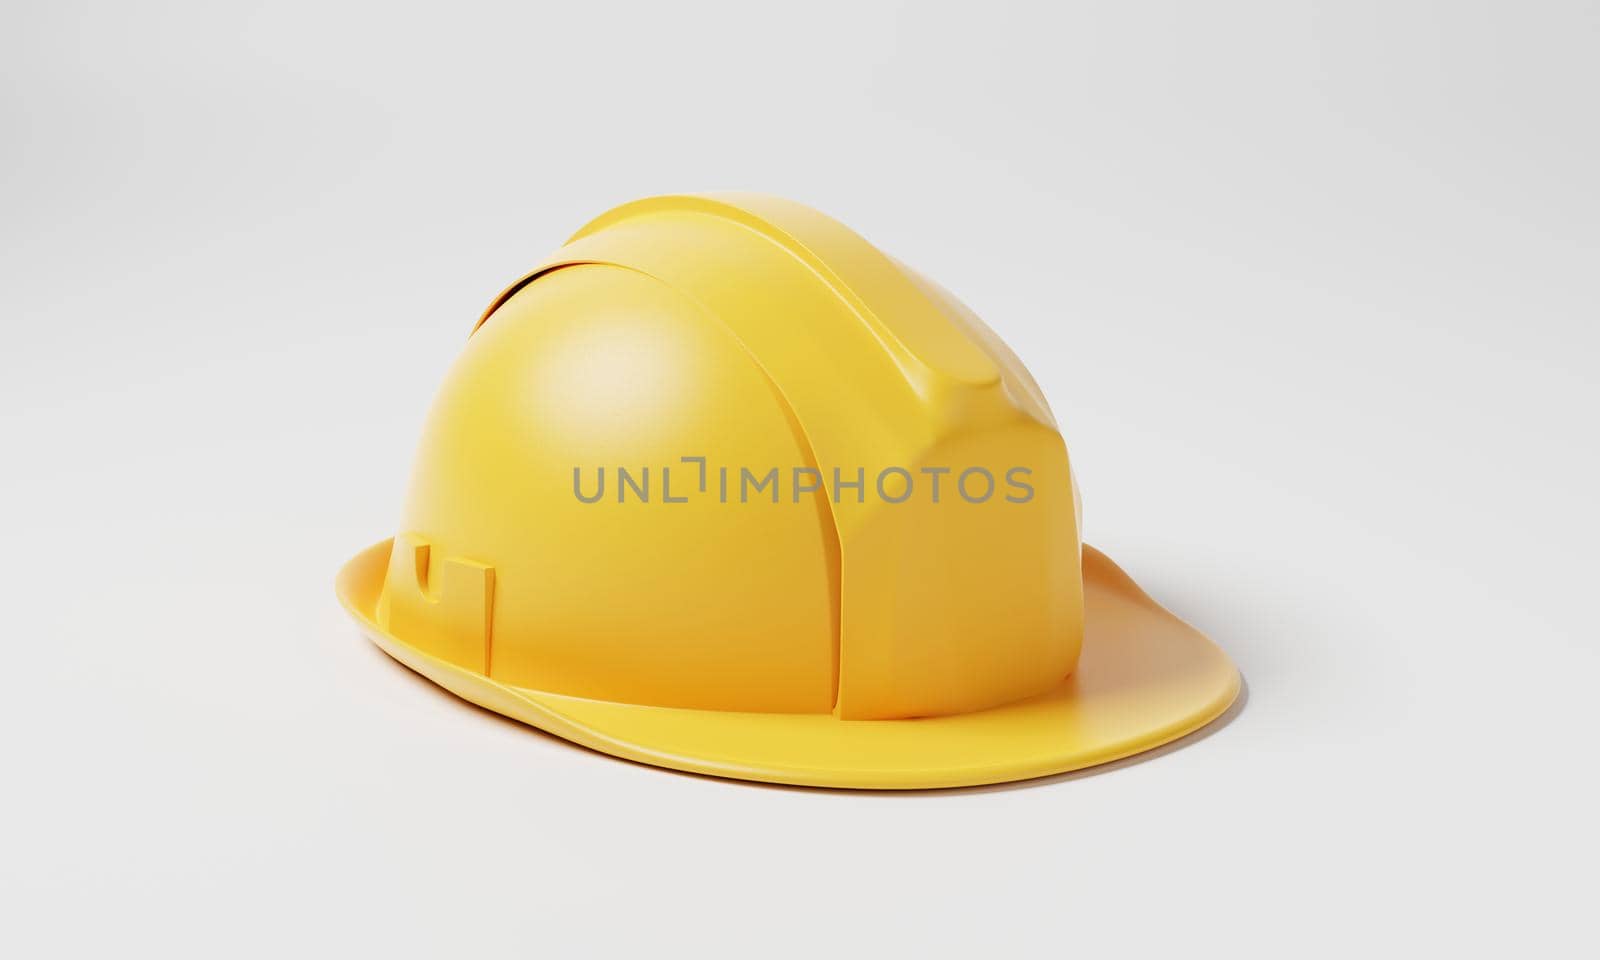 Yellow hard hat safety helmet on white background. Business and construction engineering concept. 3D illustration rendering by MiniStocker